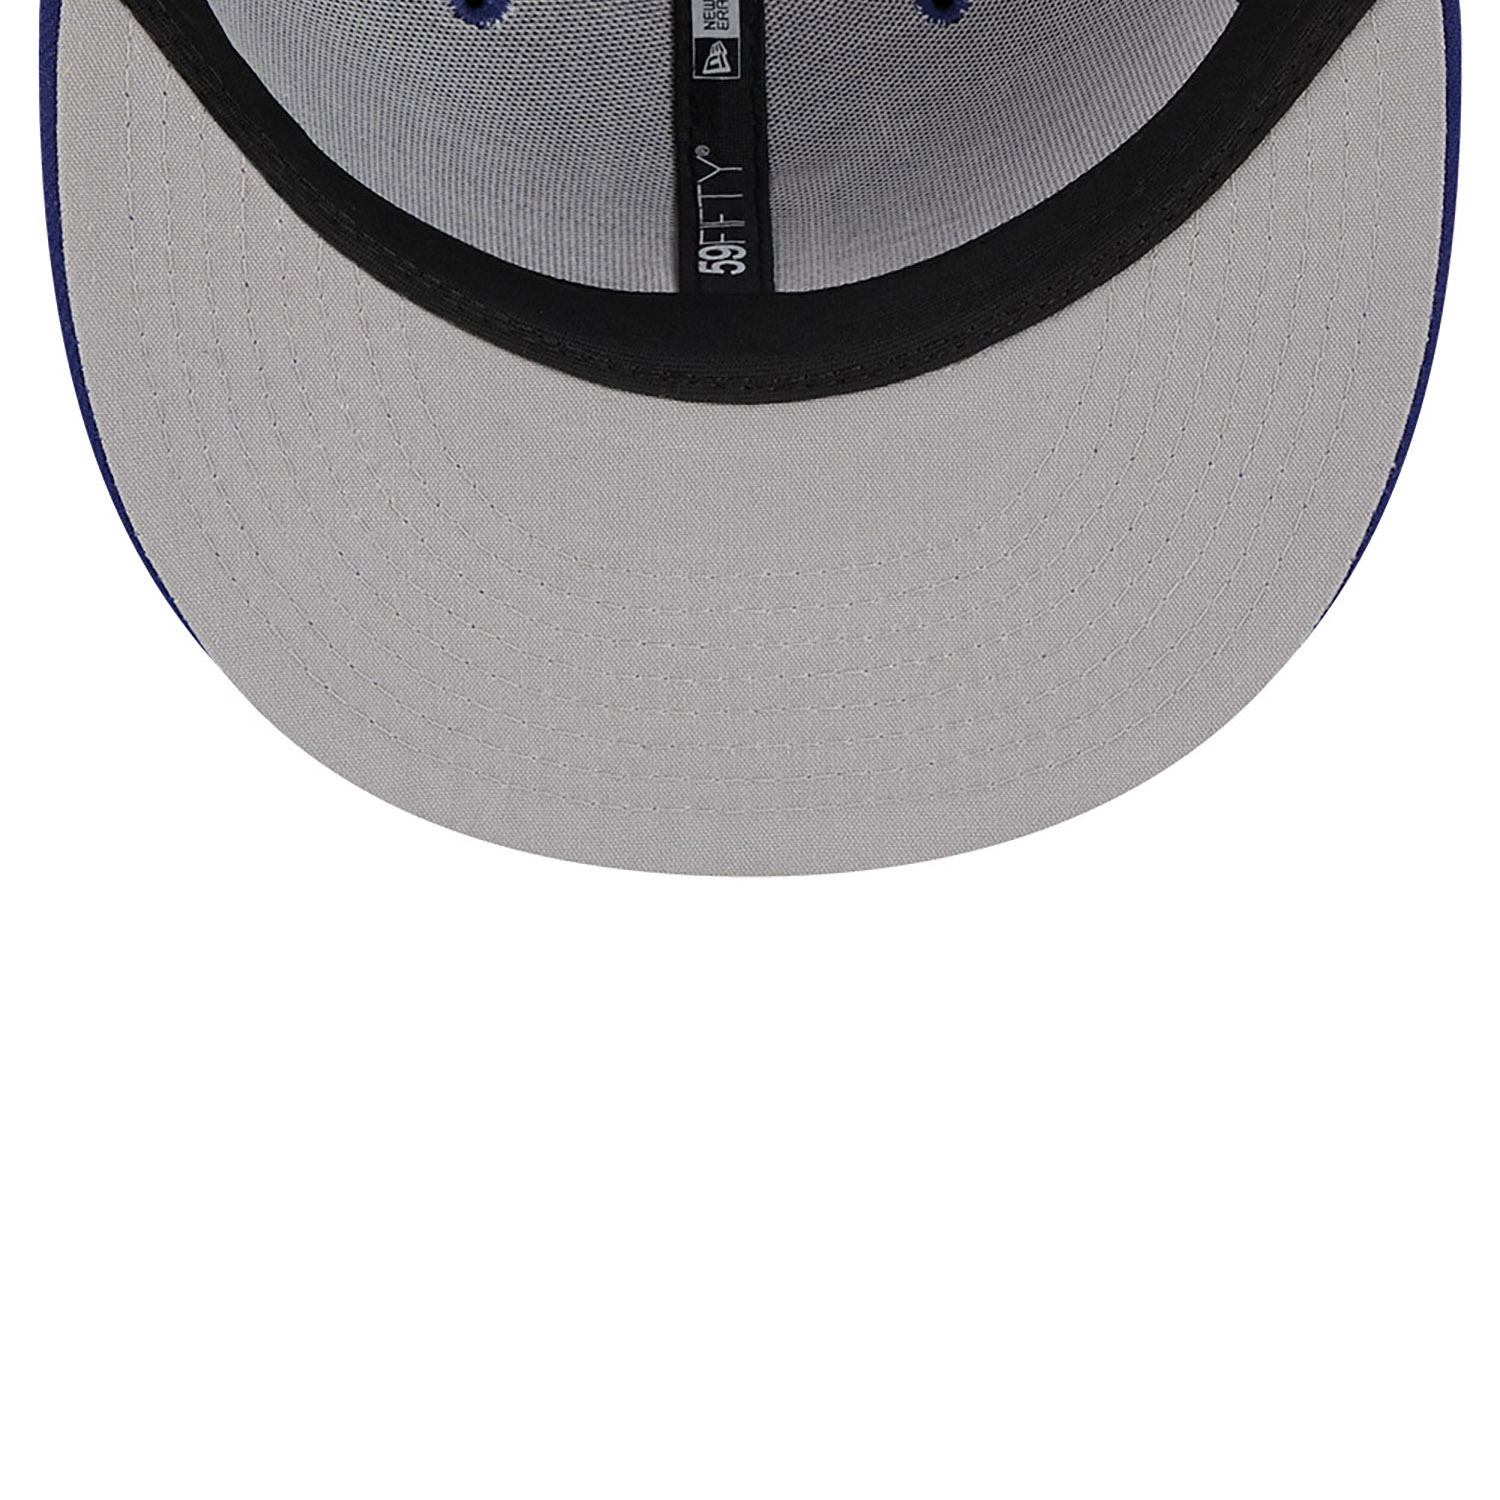 LA Dodgers MLB All Star Game Workout Dark Blue 59FIFTY Fitted Cap